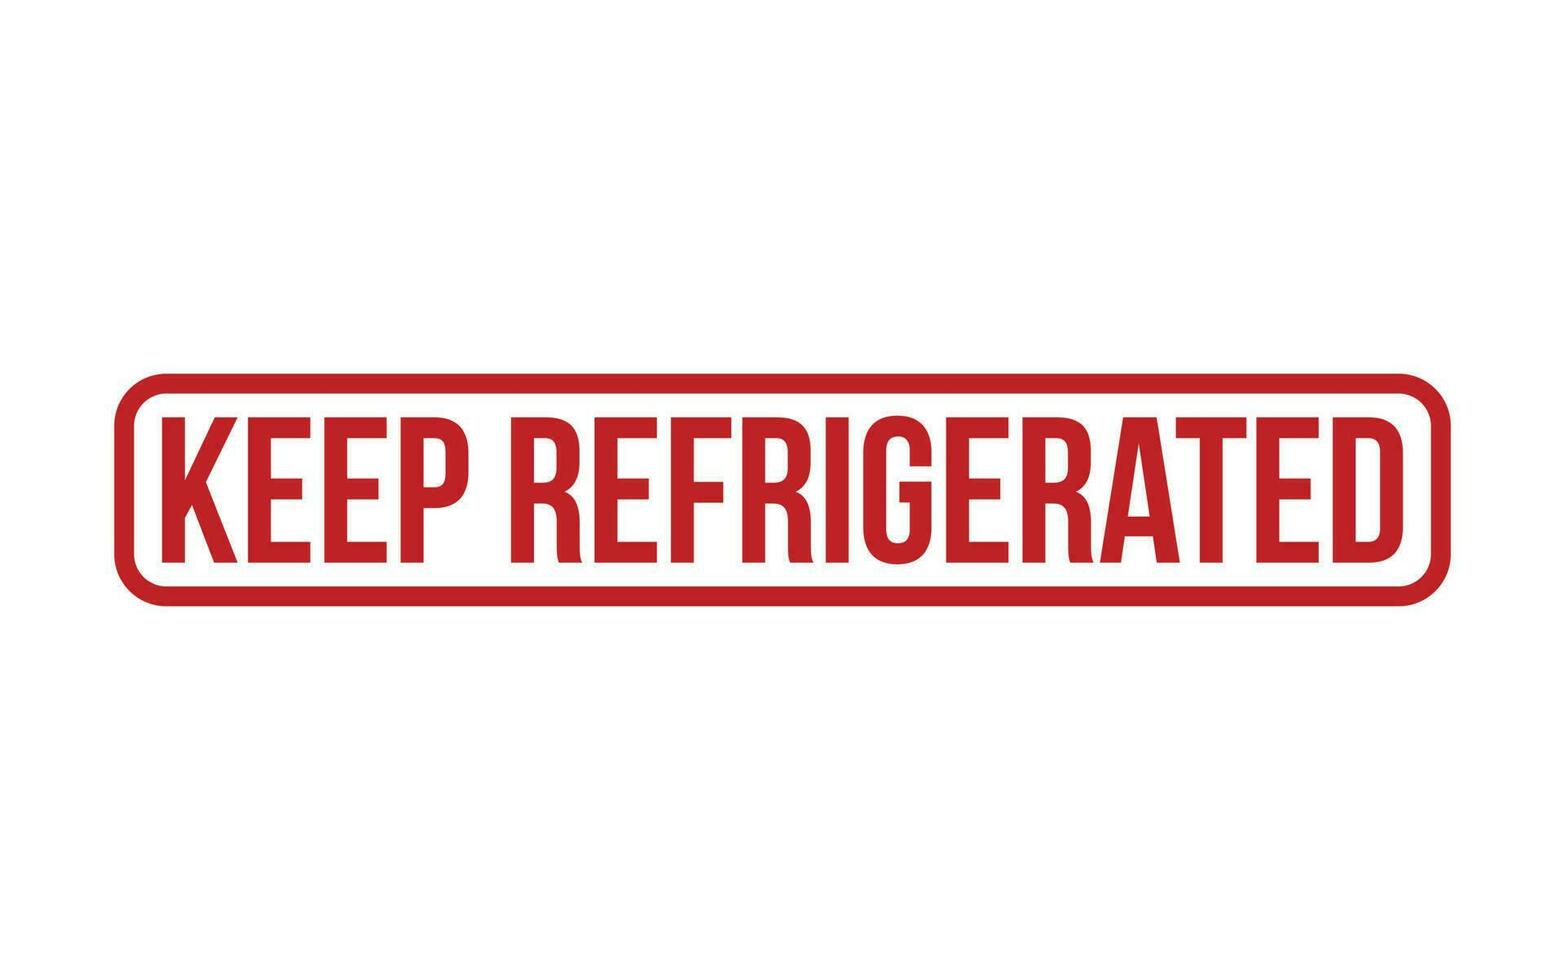 Red Keep Refrigerated Rubber Stamp Seal Vector